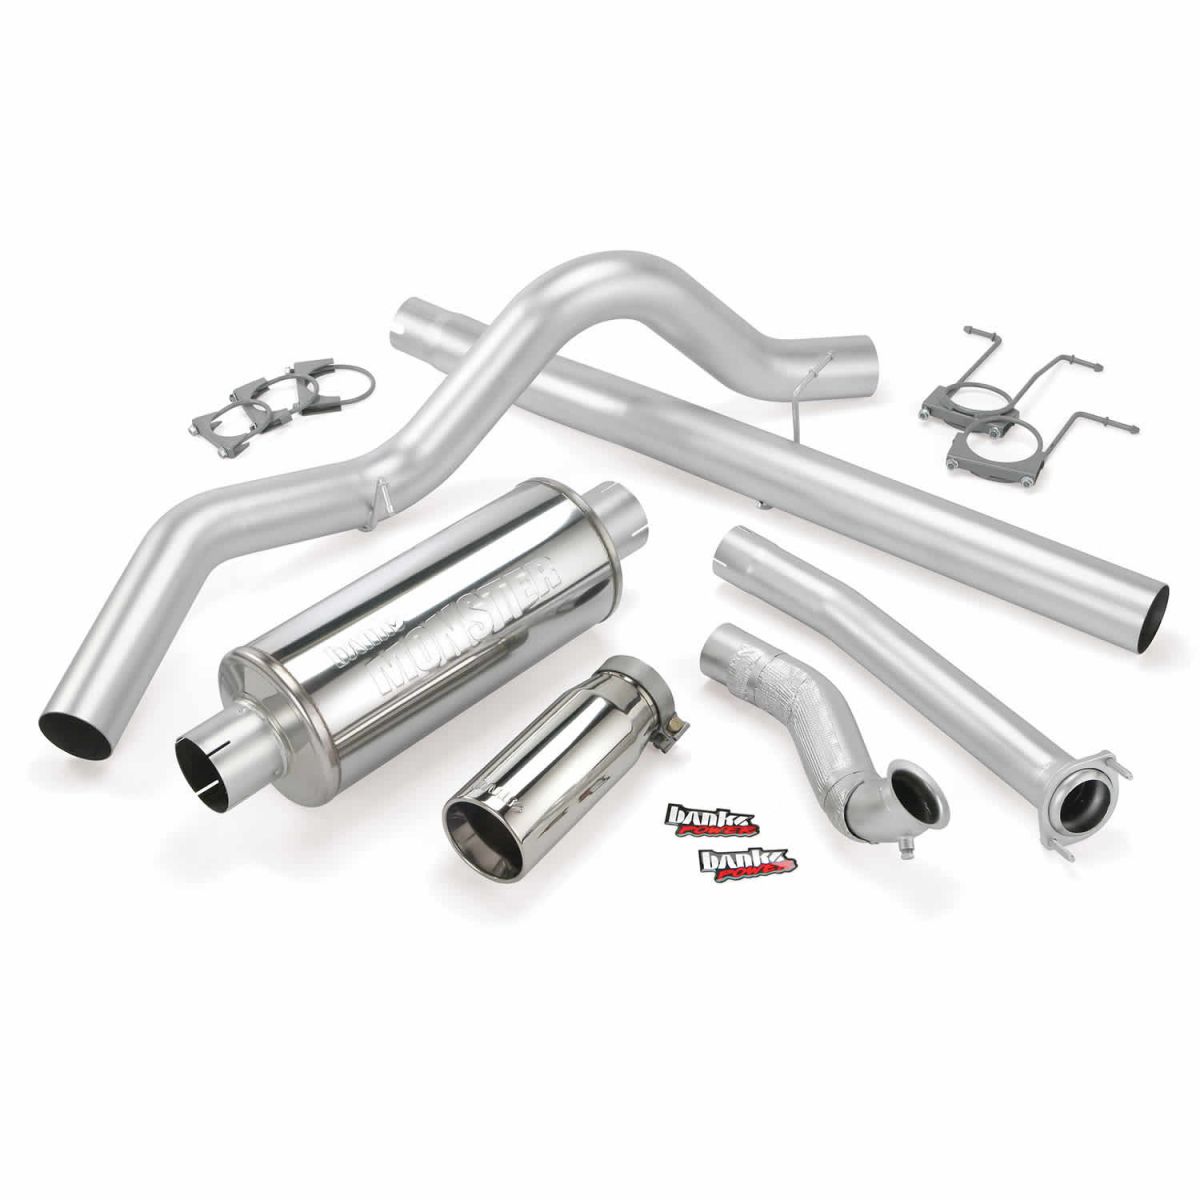 Banks Power - Banks Power 4" Exhaust System Single Exit With Chrome Tip For 94-97 7.3L Powerstroke ECLB